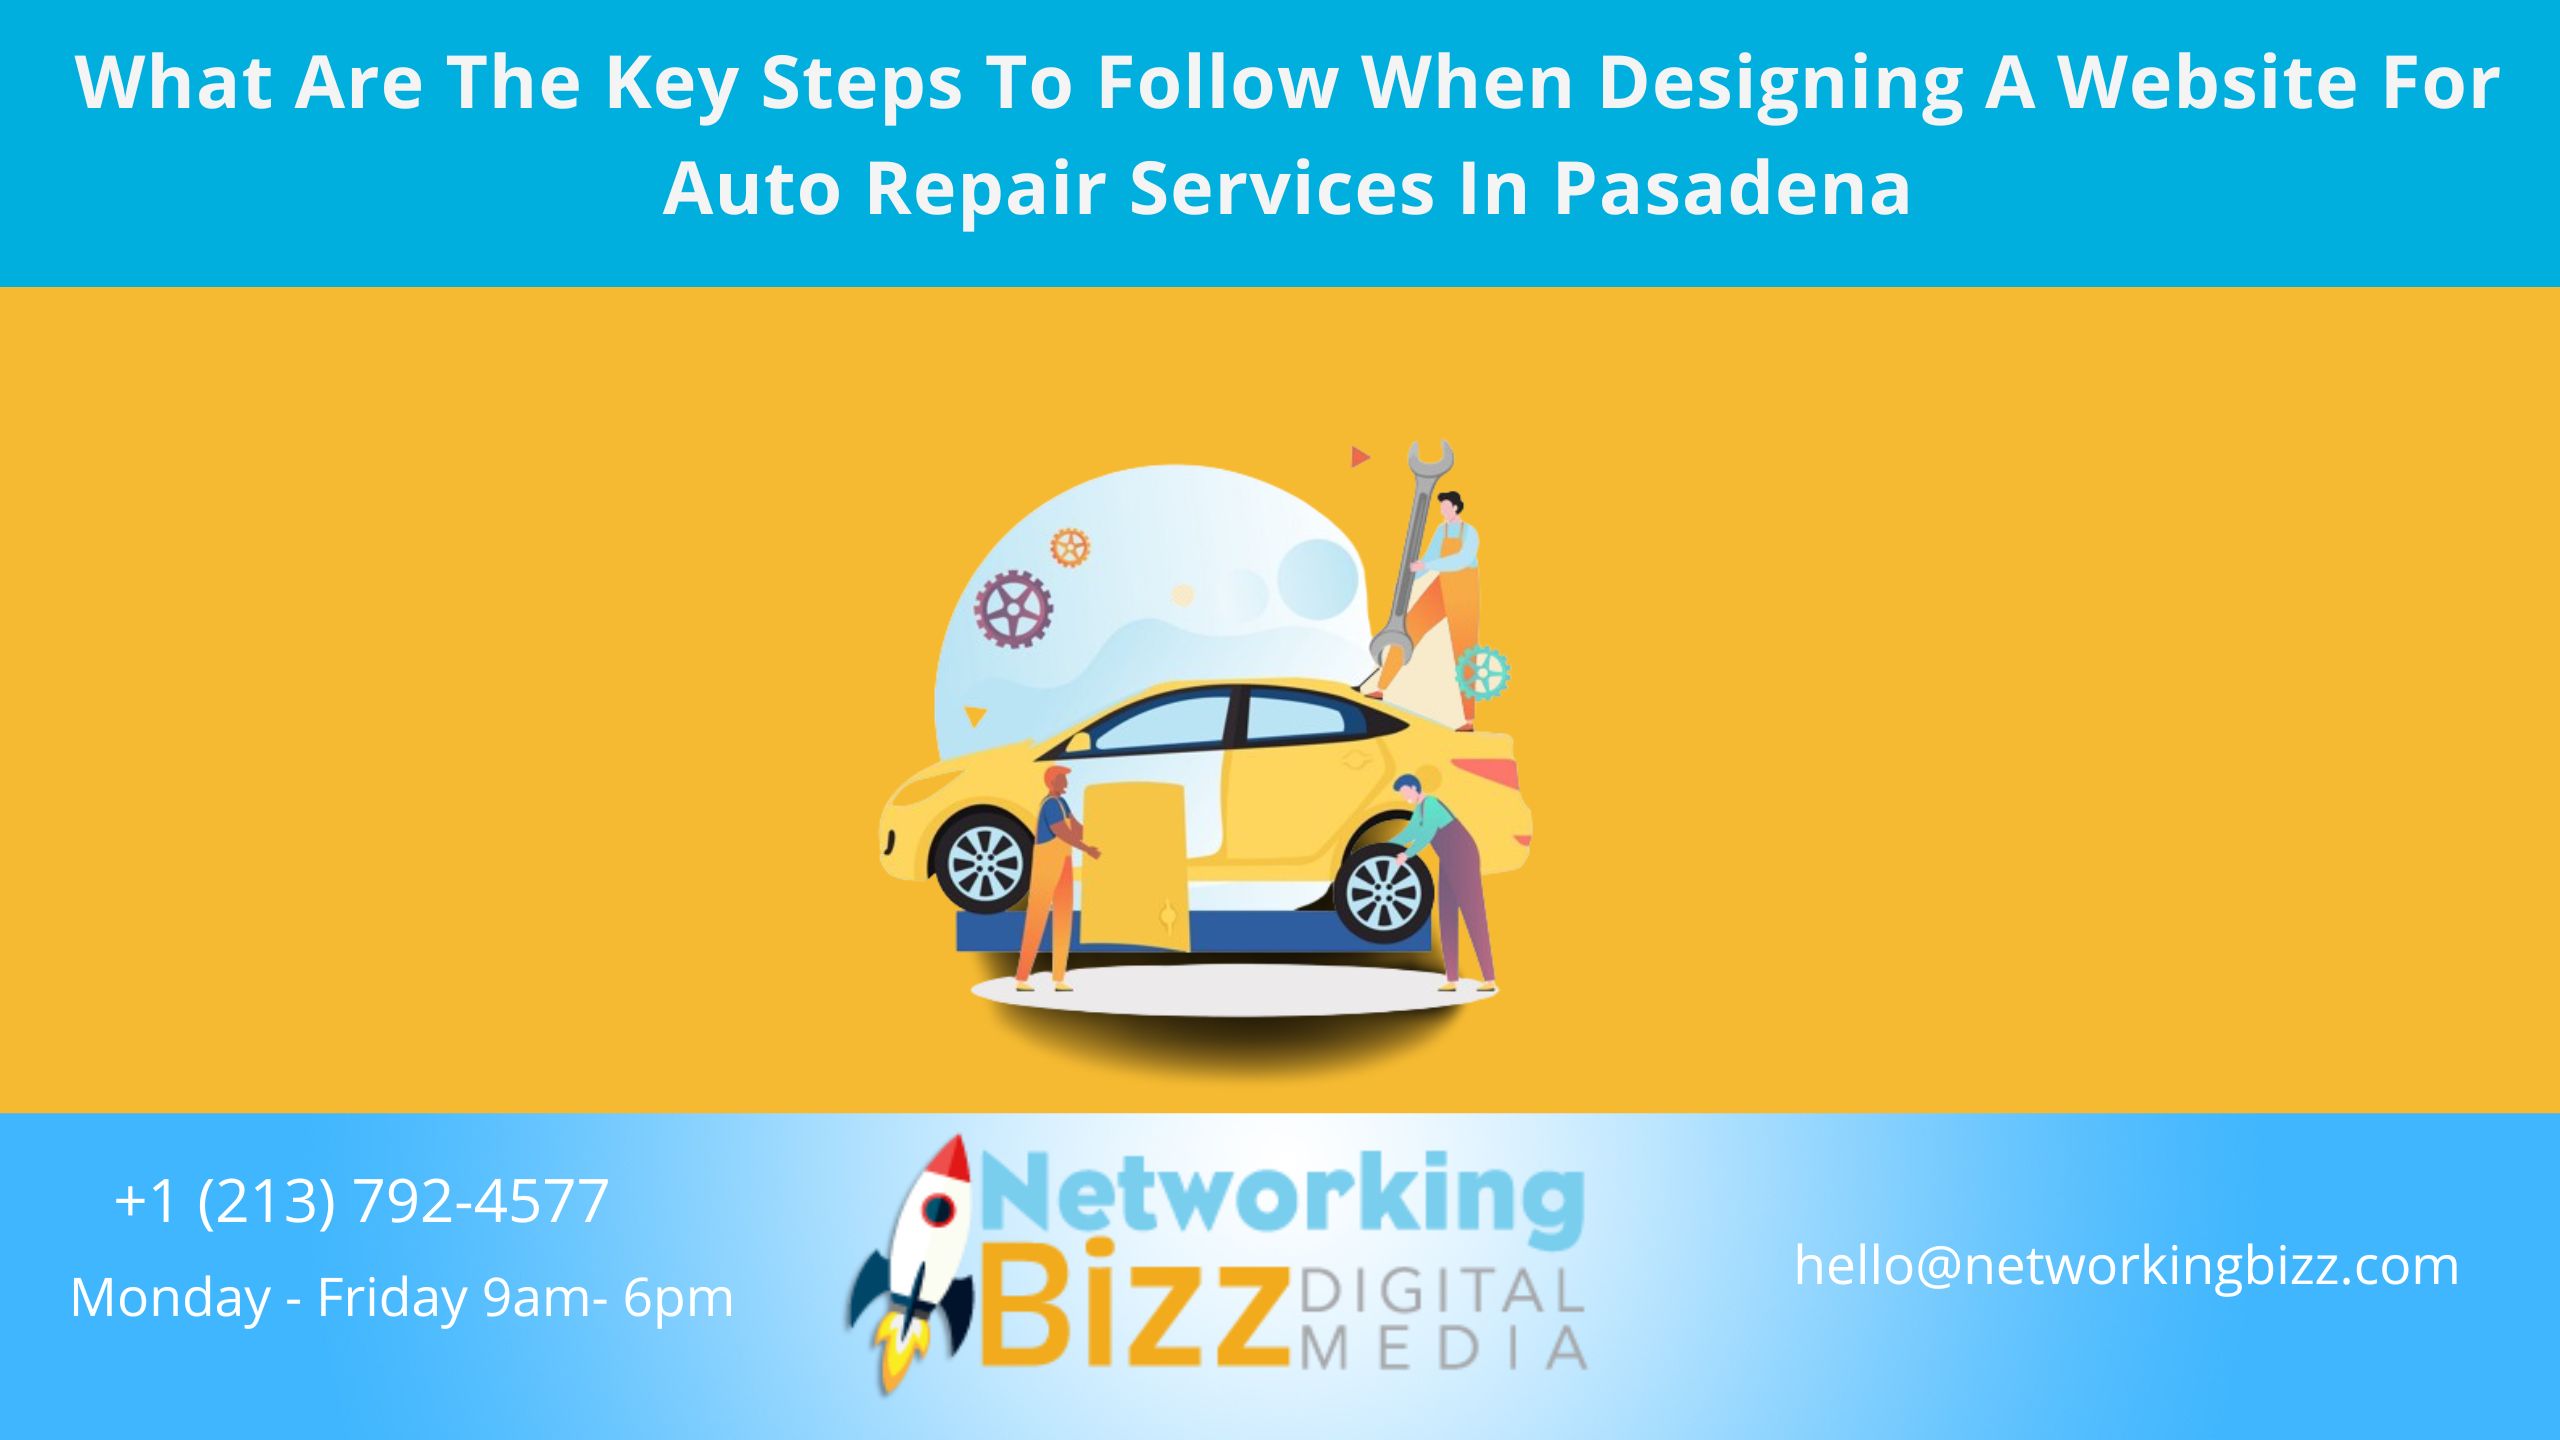 What Are The Key Steps To Follow When Designing A Website For Auto Repair Services In Pasadena